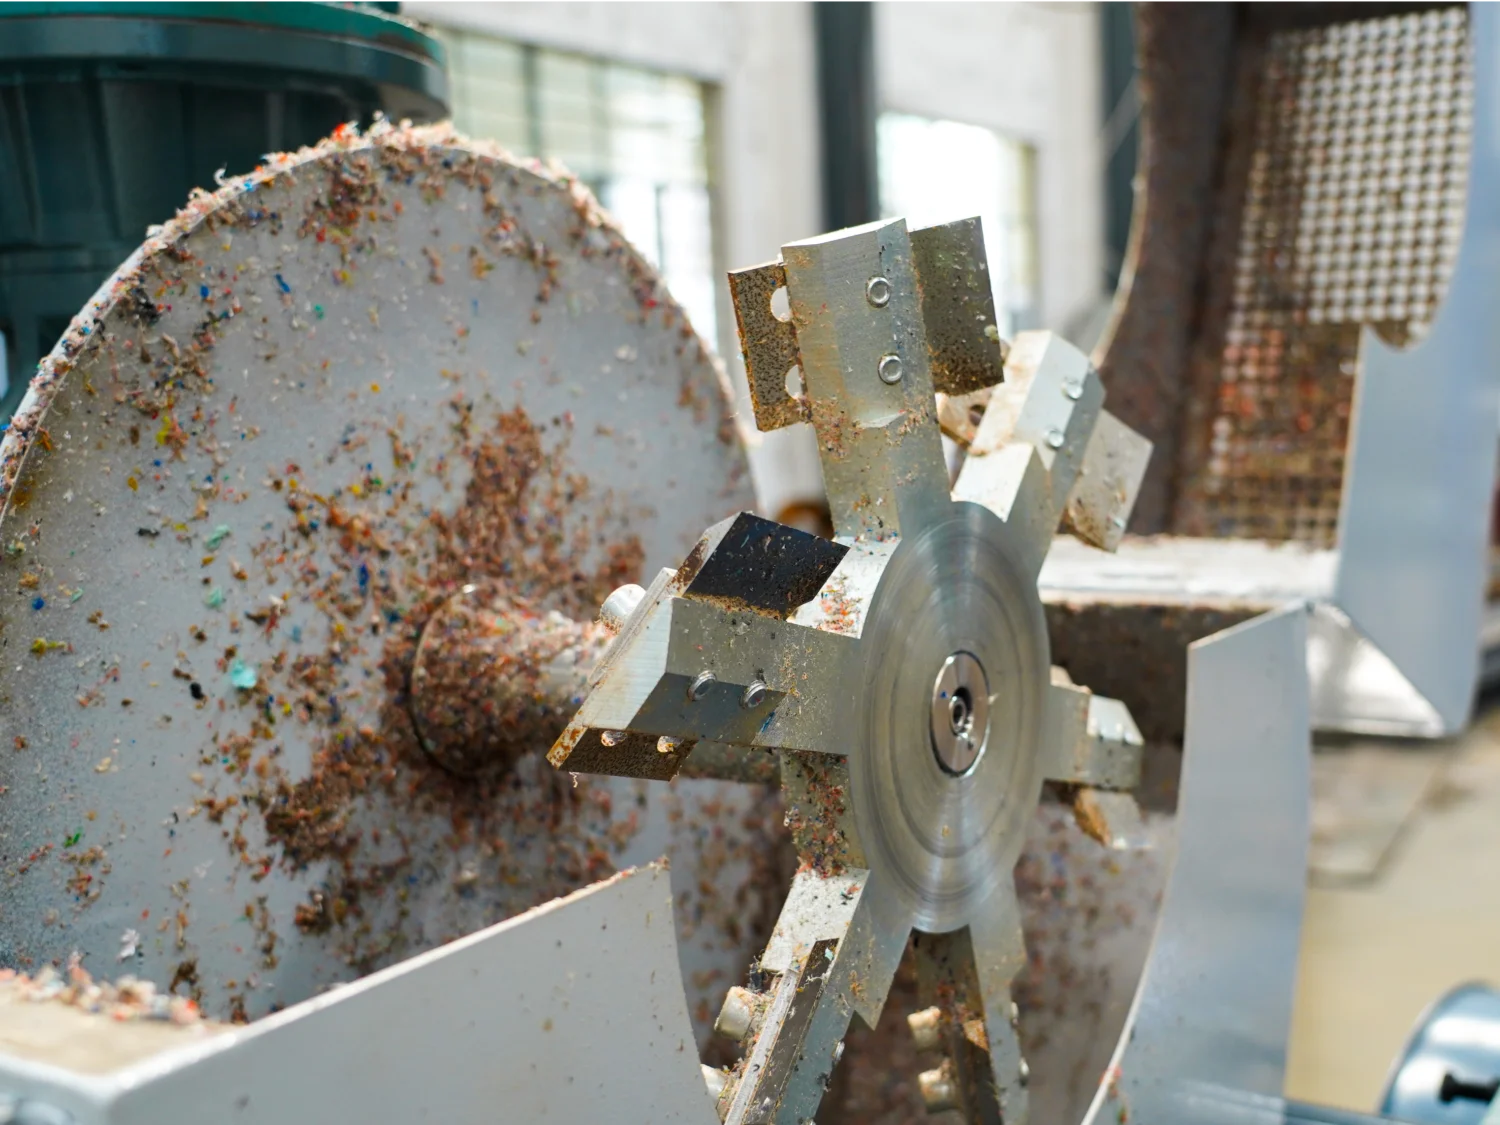 The image appears to show part of a machine used for processing materials. It specifically features a metallic rotor or cutting blade covered in processed material, possibly indicating that it's part of a plastic granulator or shredding machine. This machinery is typically used in recycling or manufacturing settings to break down plastic or other materials into smaller granules for reuse or further processing. The worn and varied appearance of the material on the rotor suggests a collection of different shredded substances.